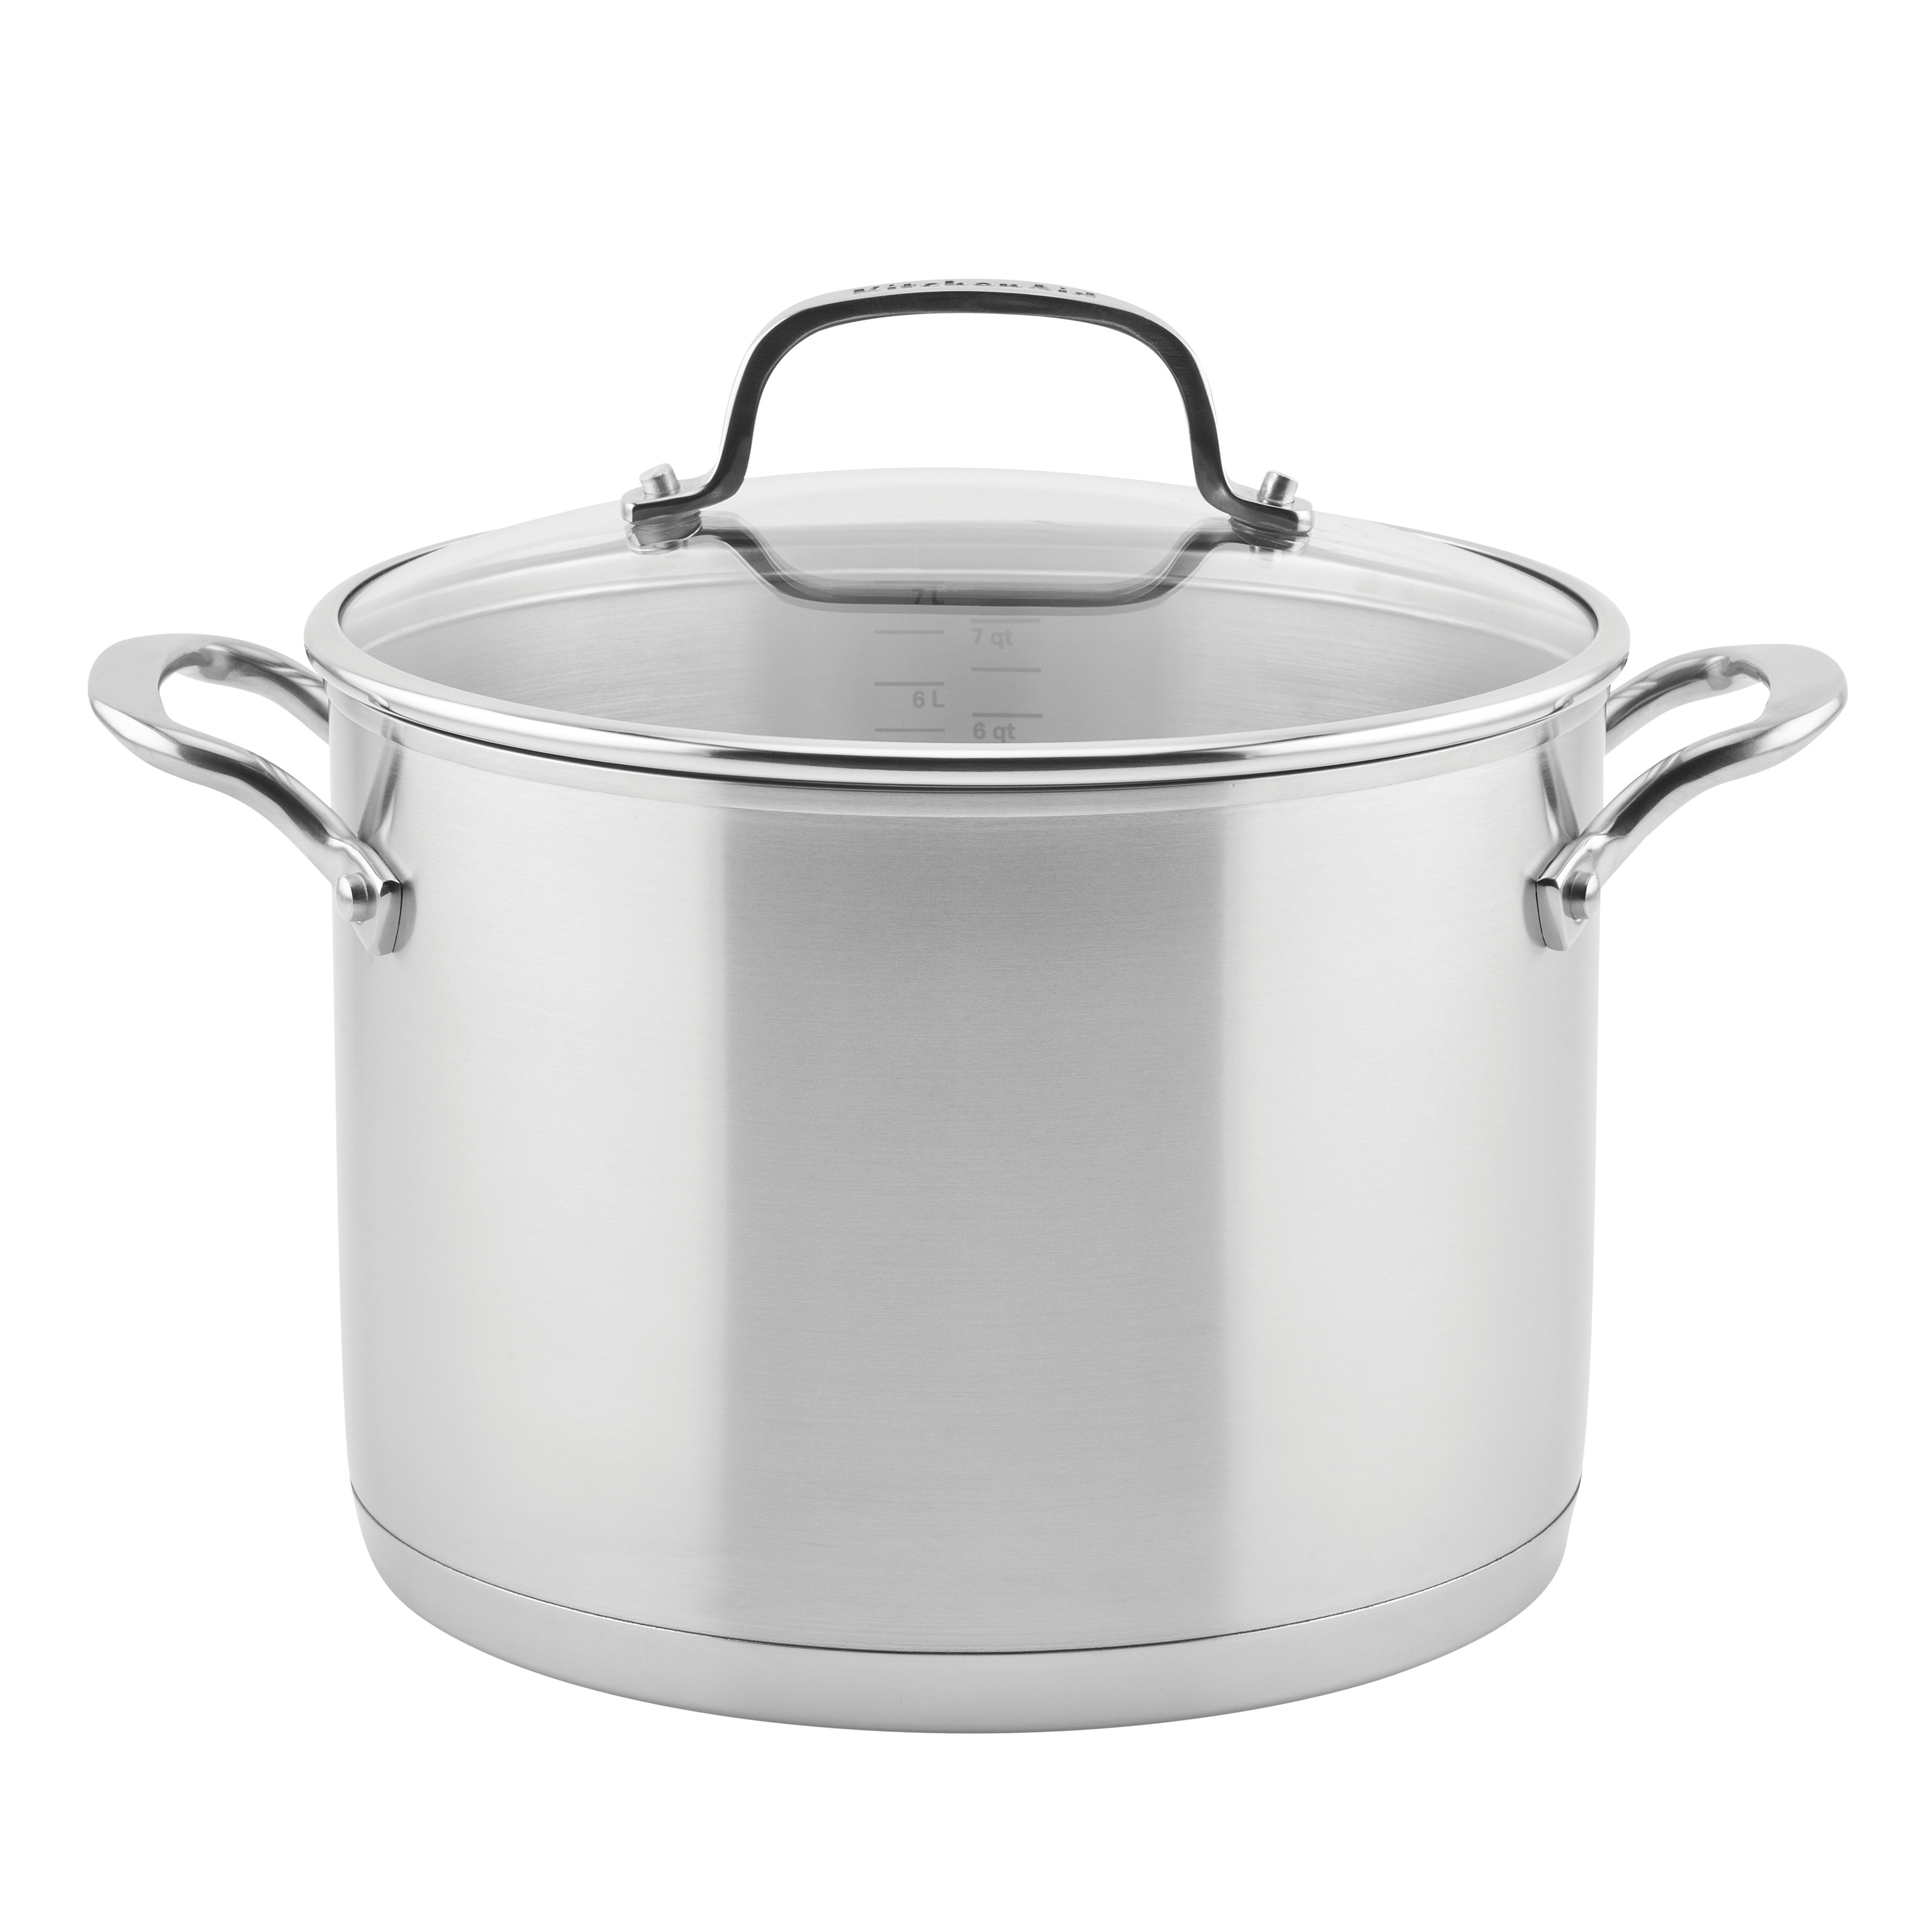 Classic Cuisine 6 qt Stainless Steel Stock Pot with Lid 